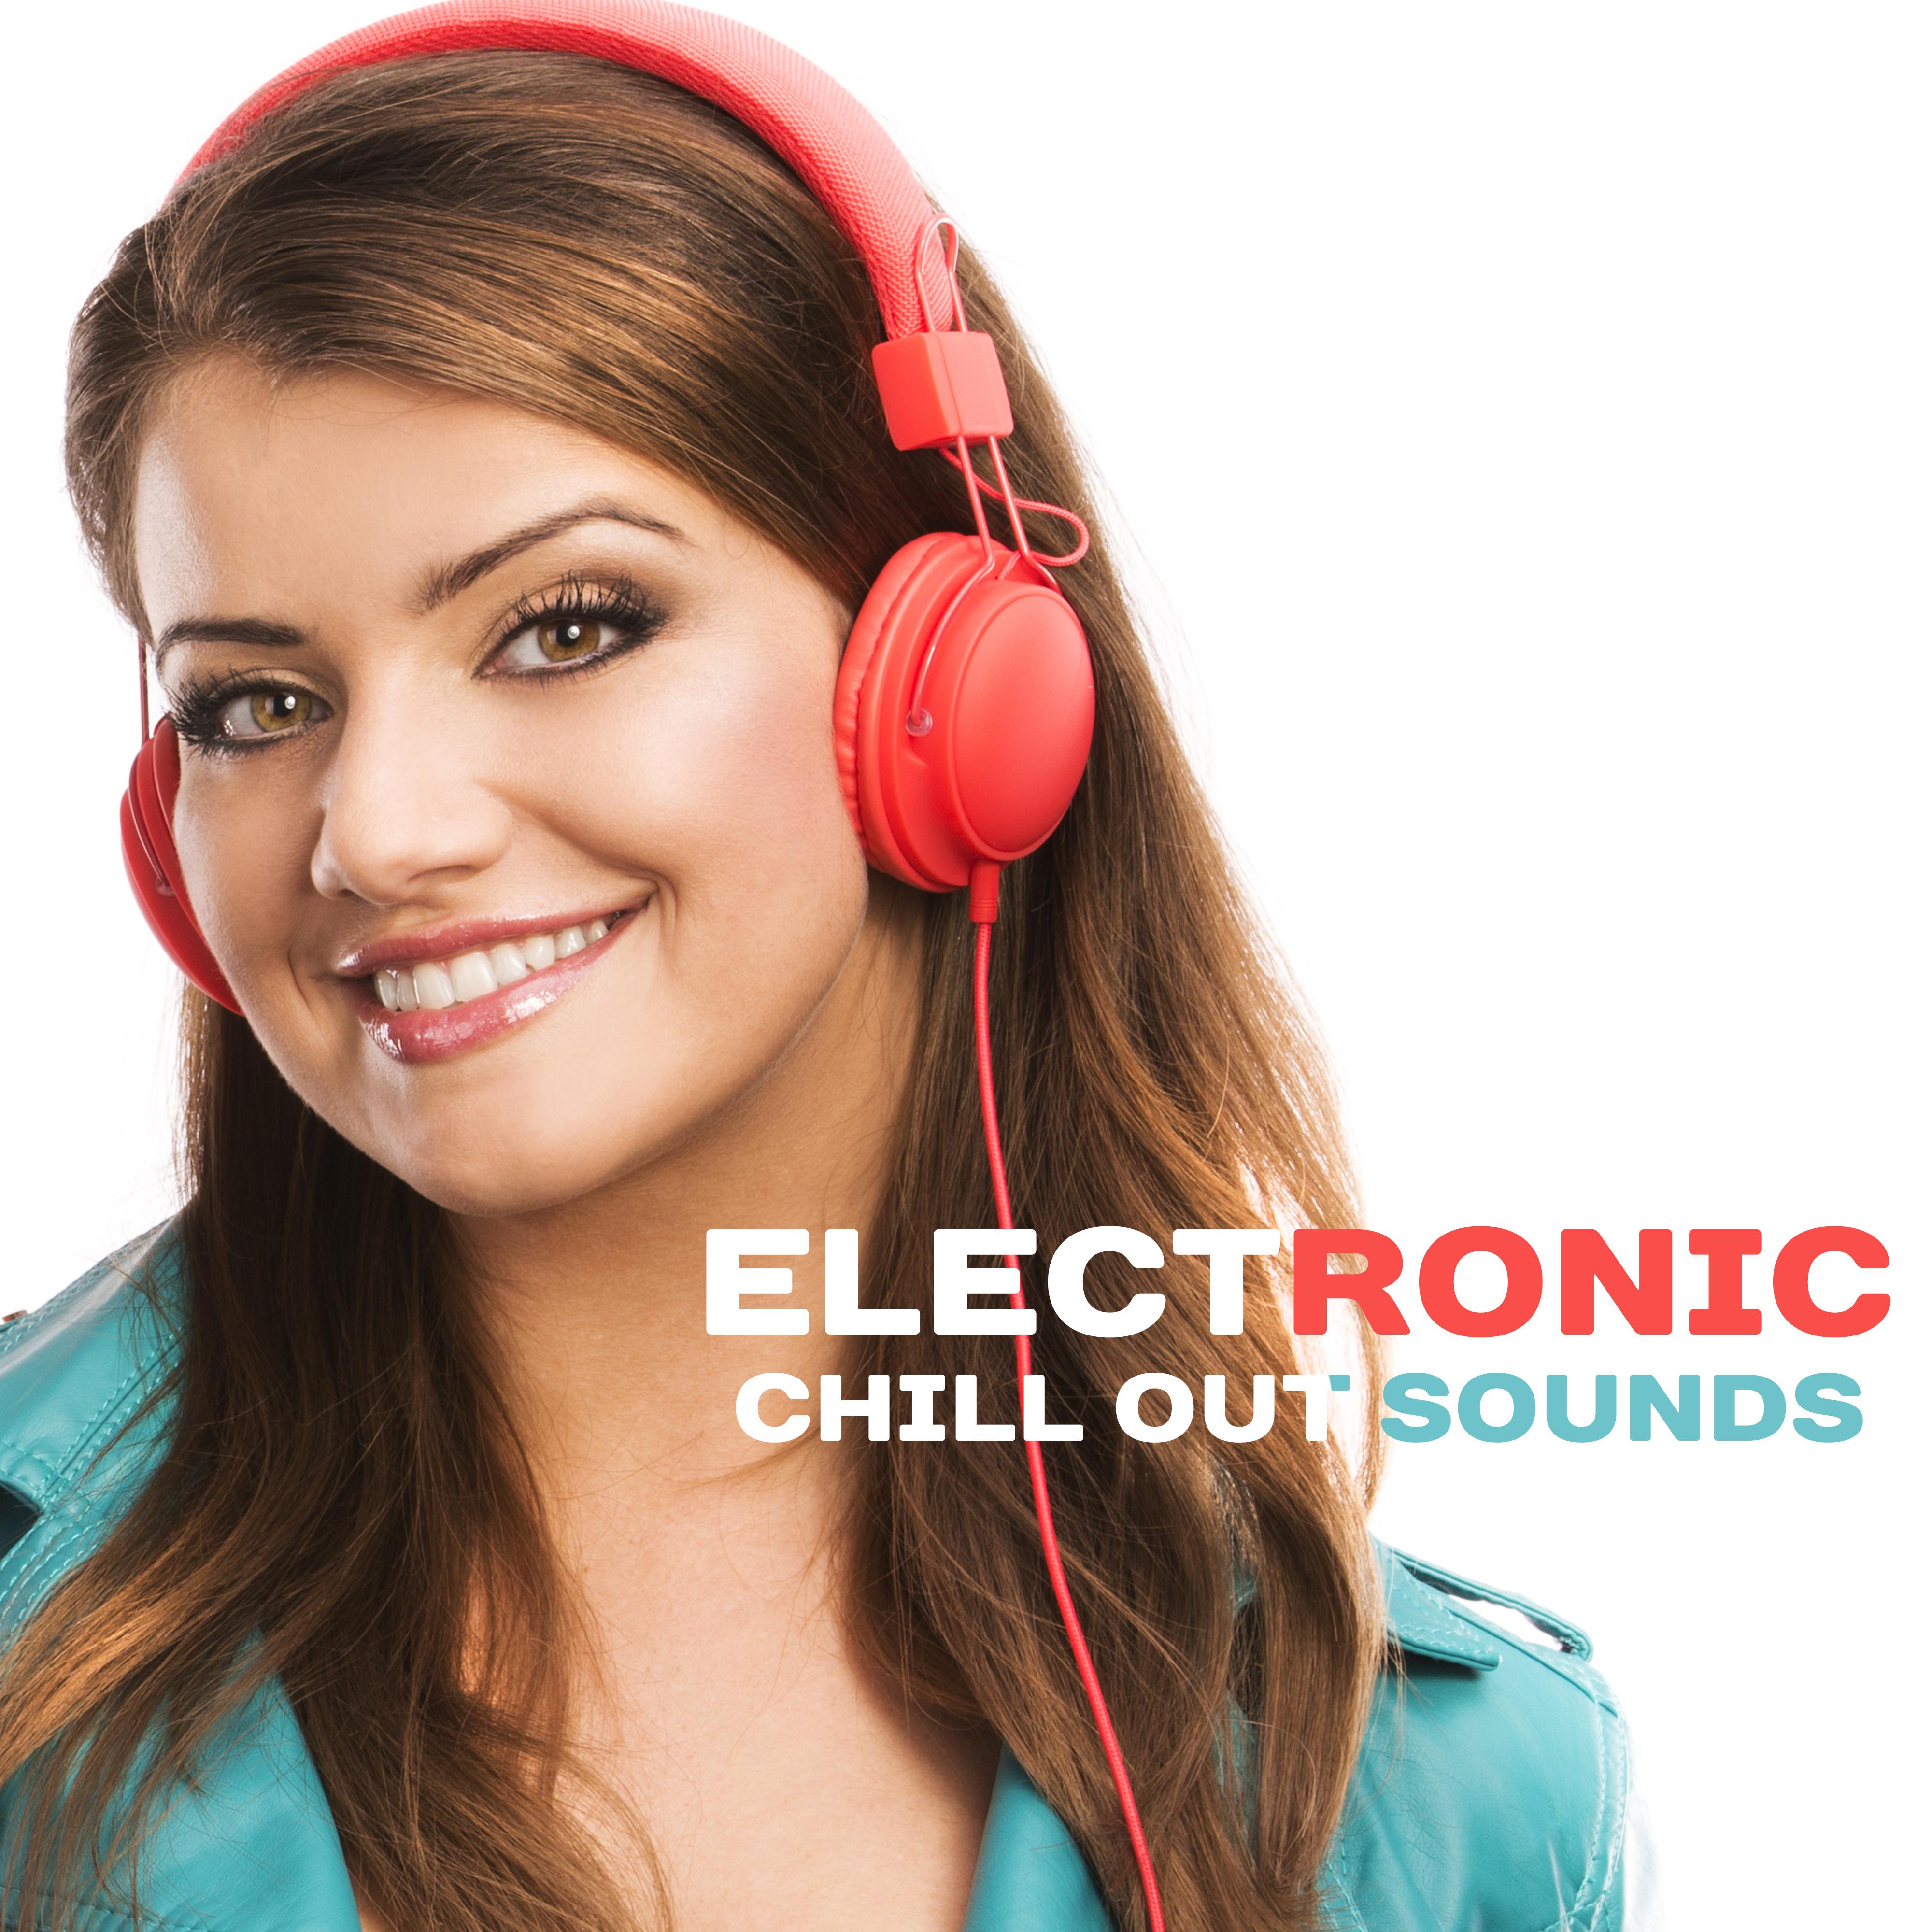 Electronic Chill Out Sounds – Calming Sounds to Relax, Electronic Vibes, Summer Rest, Holiday Beats